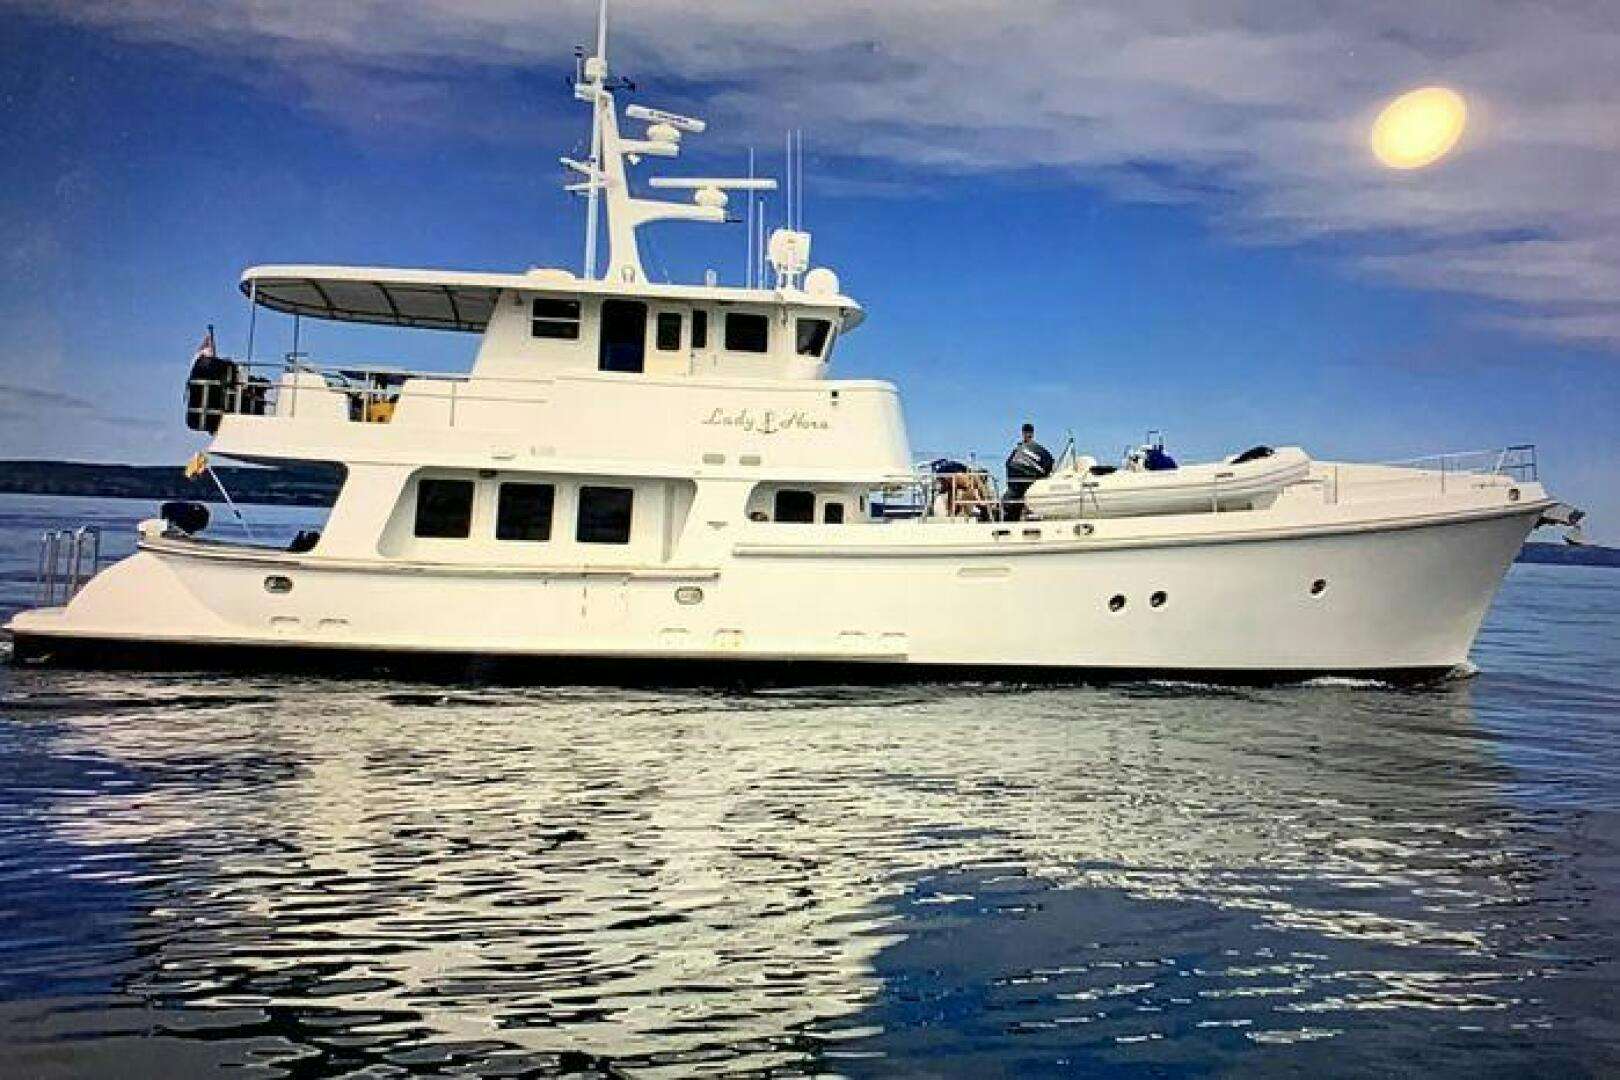 Lady nora ii
Yacht for Sale